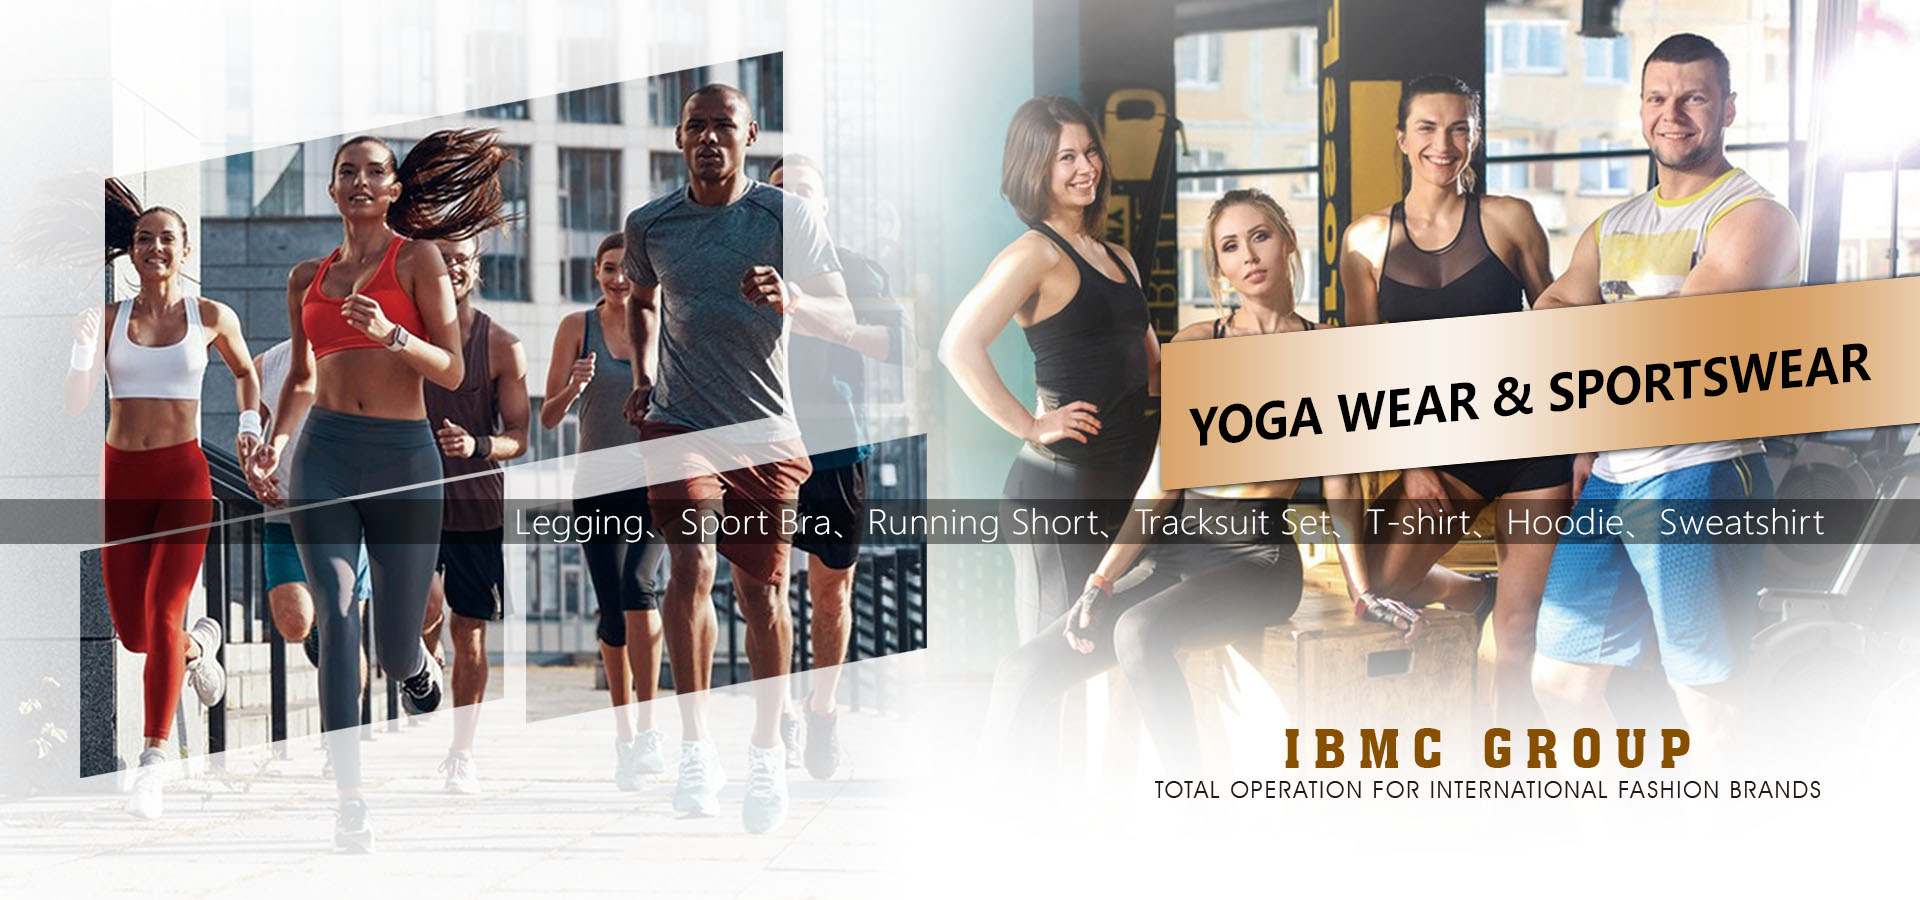 yoga wear and sportswear for men and women